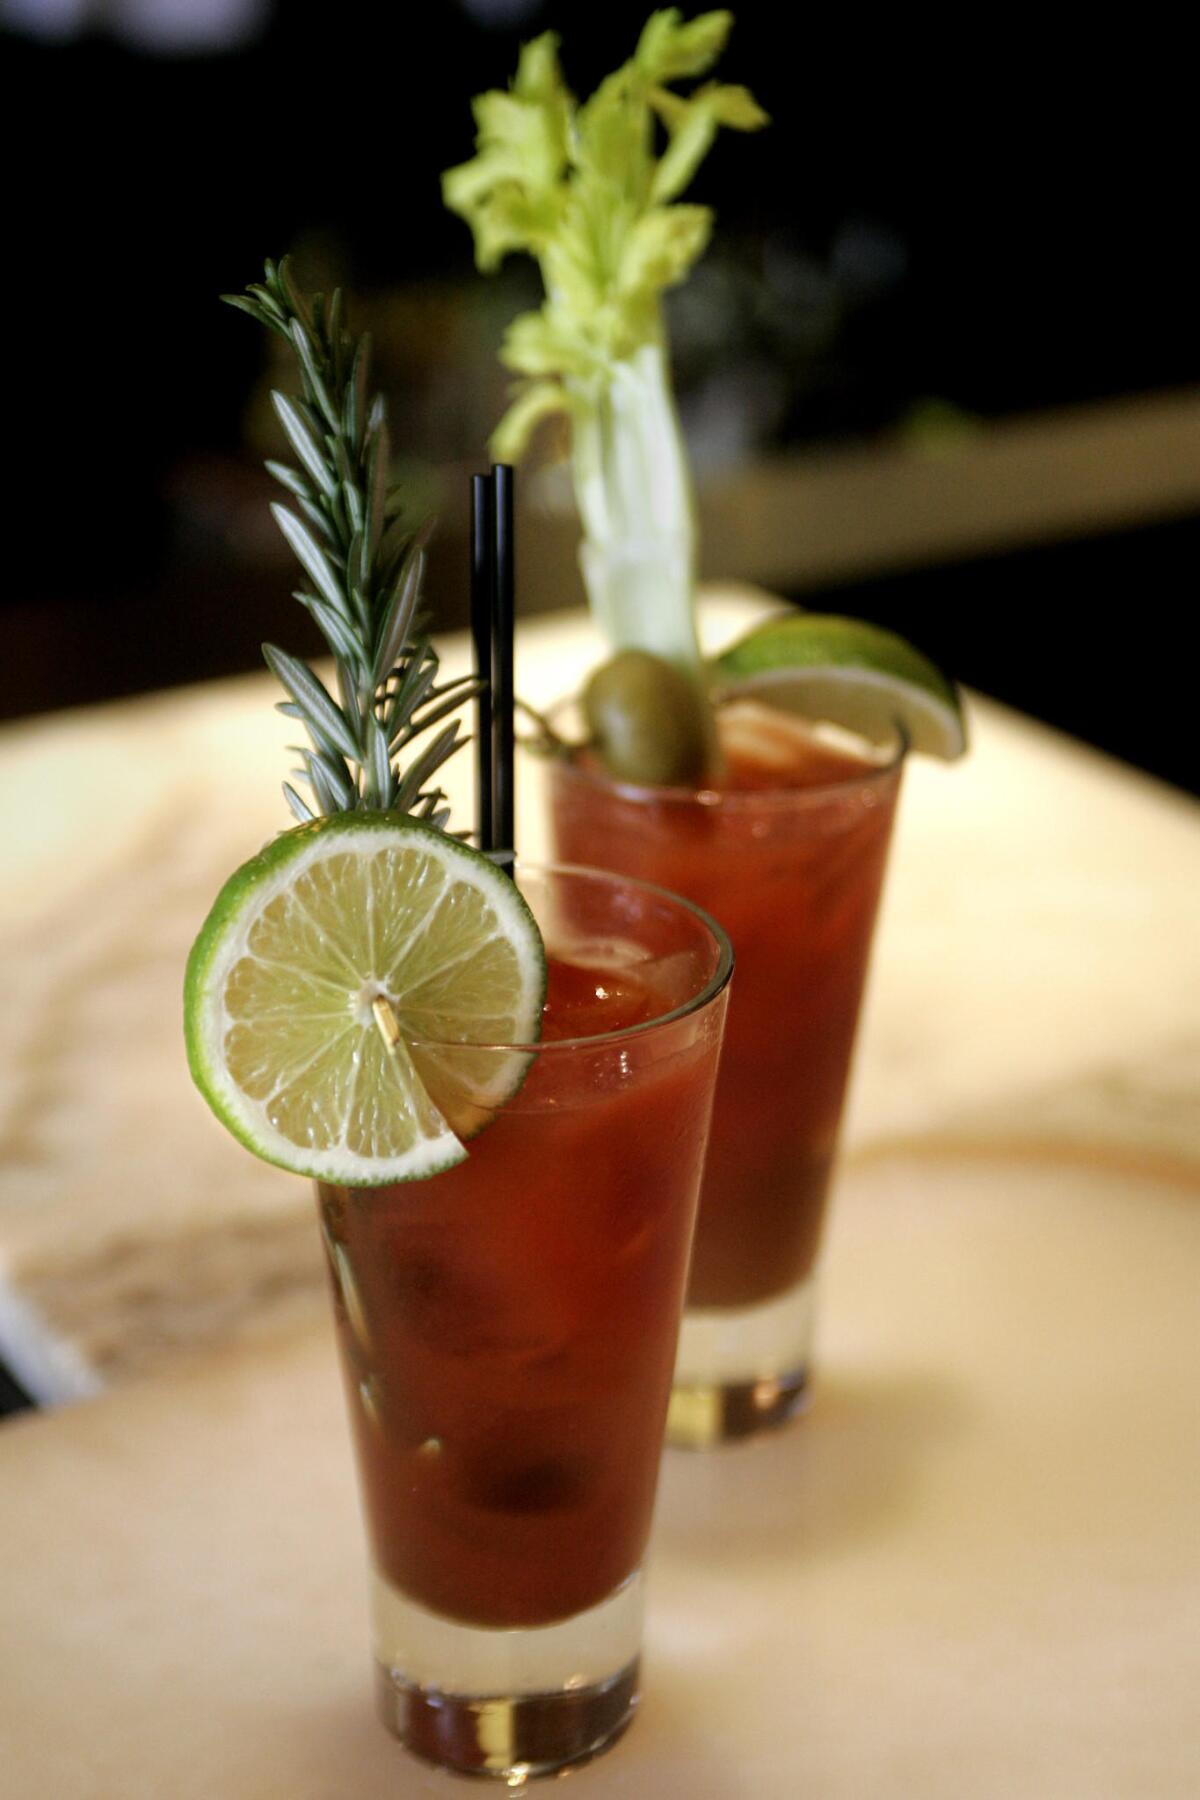 The Highland Mary garnished with rosemary and lime and Red Snapper Bloody Mary.